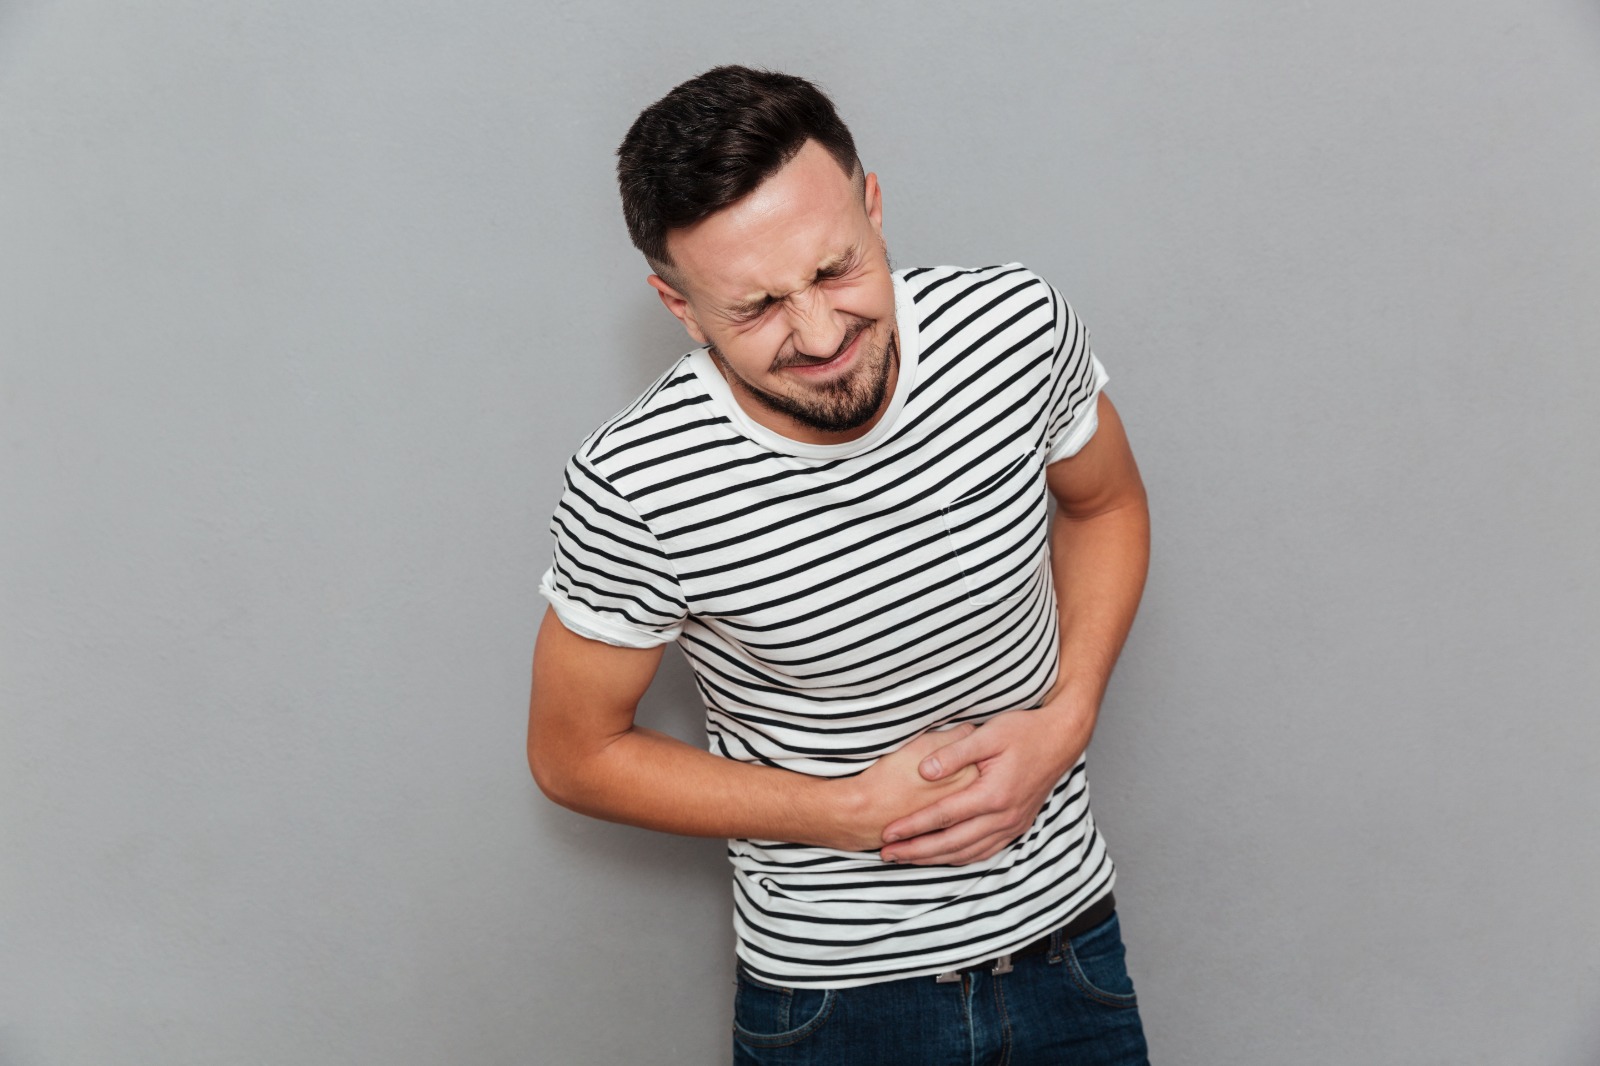 6 Simple Home Remedies to Get Rid of Indigestion Quickly